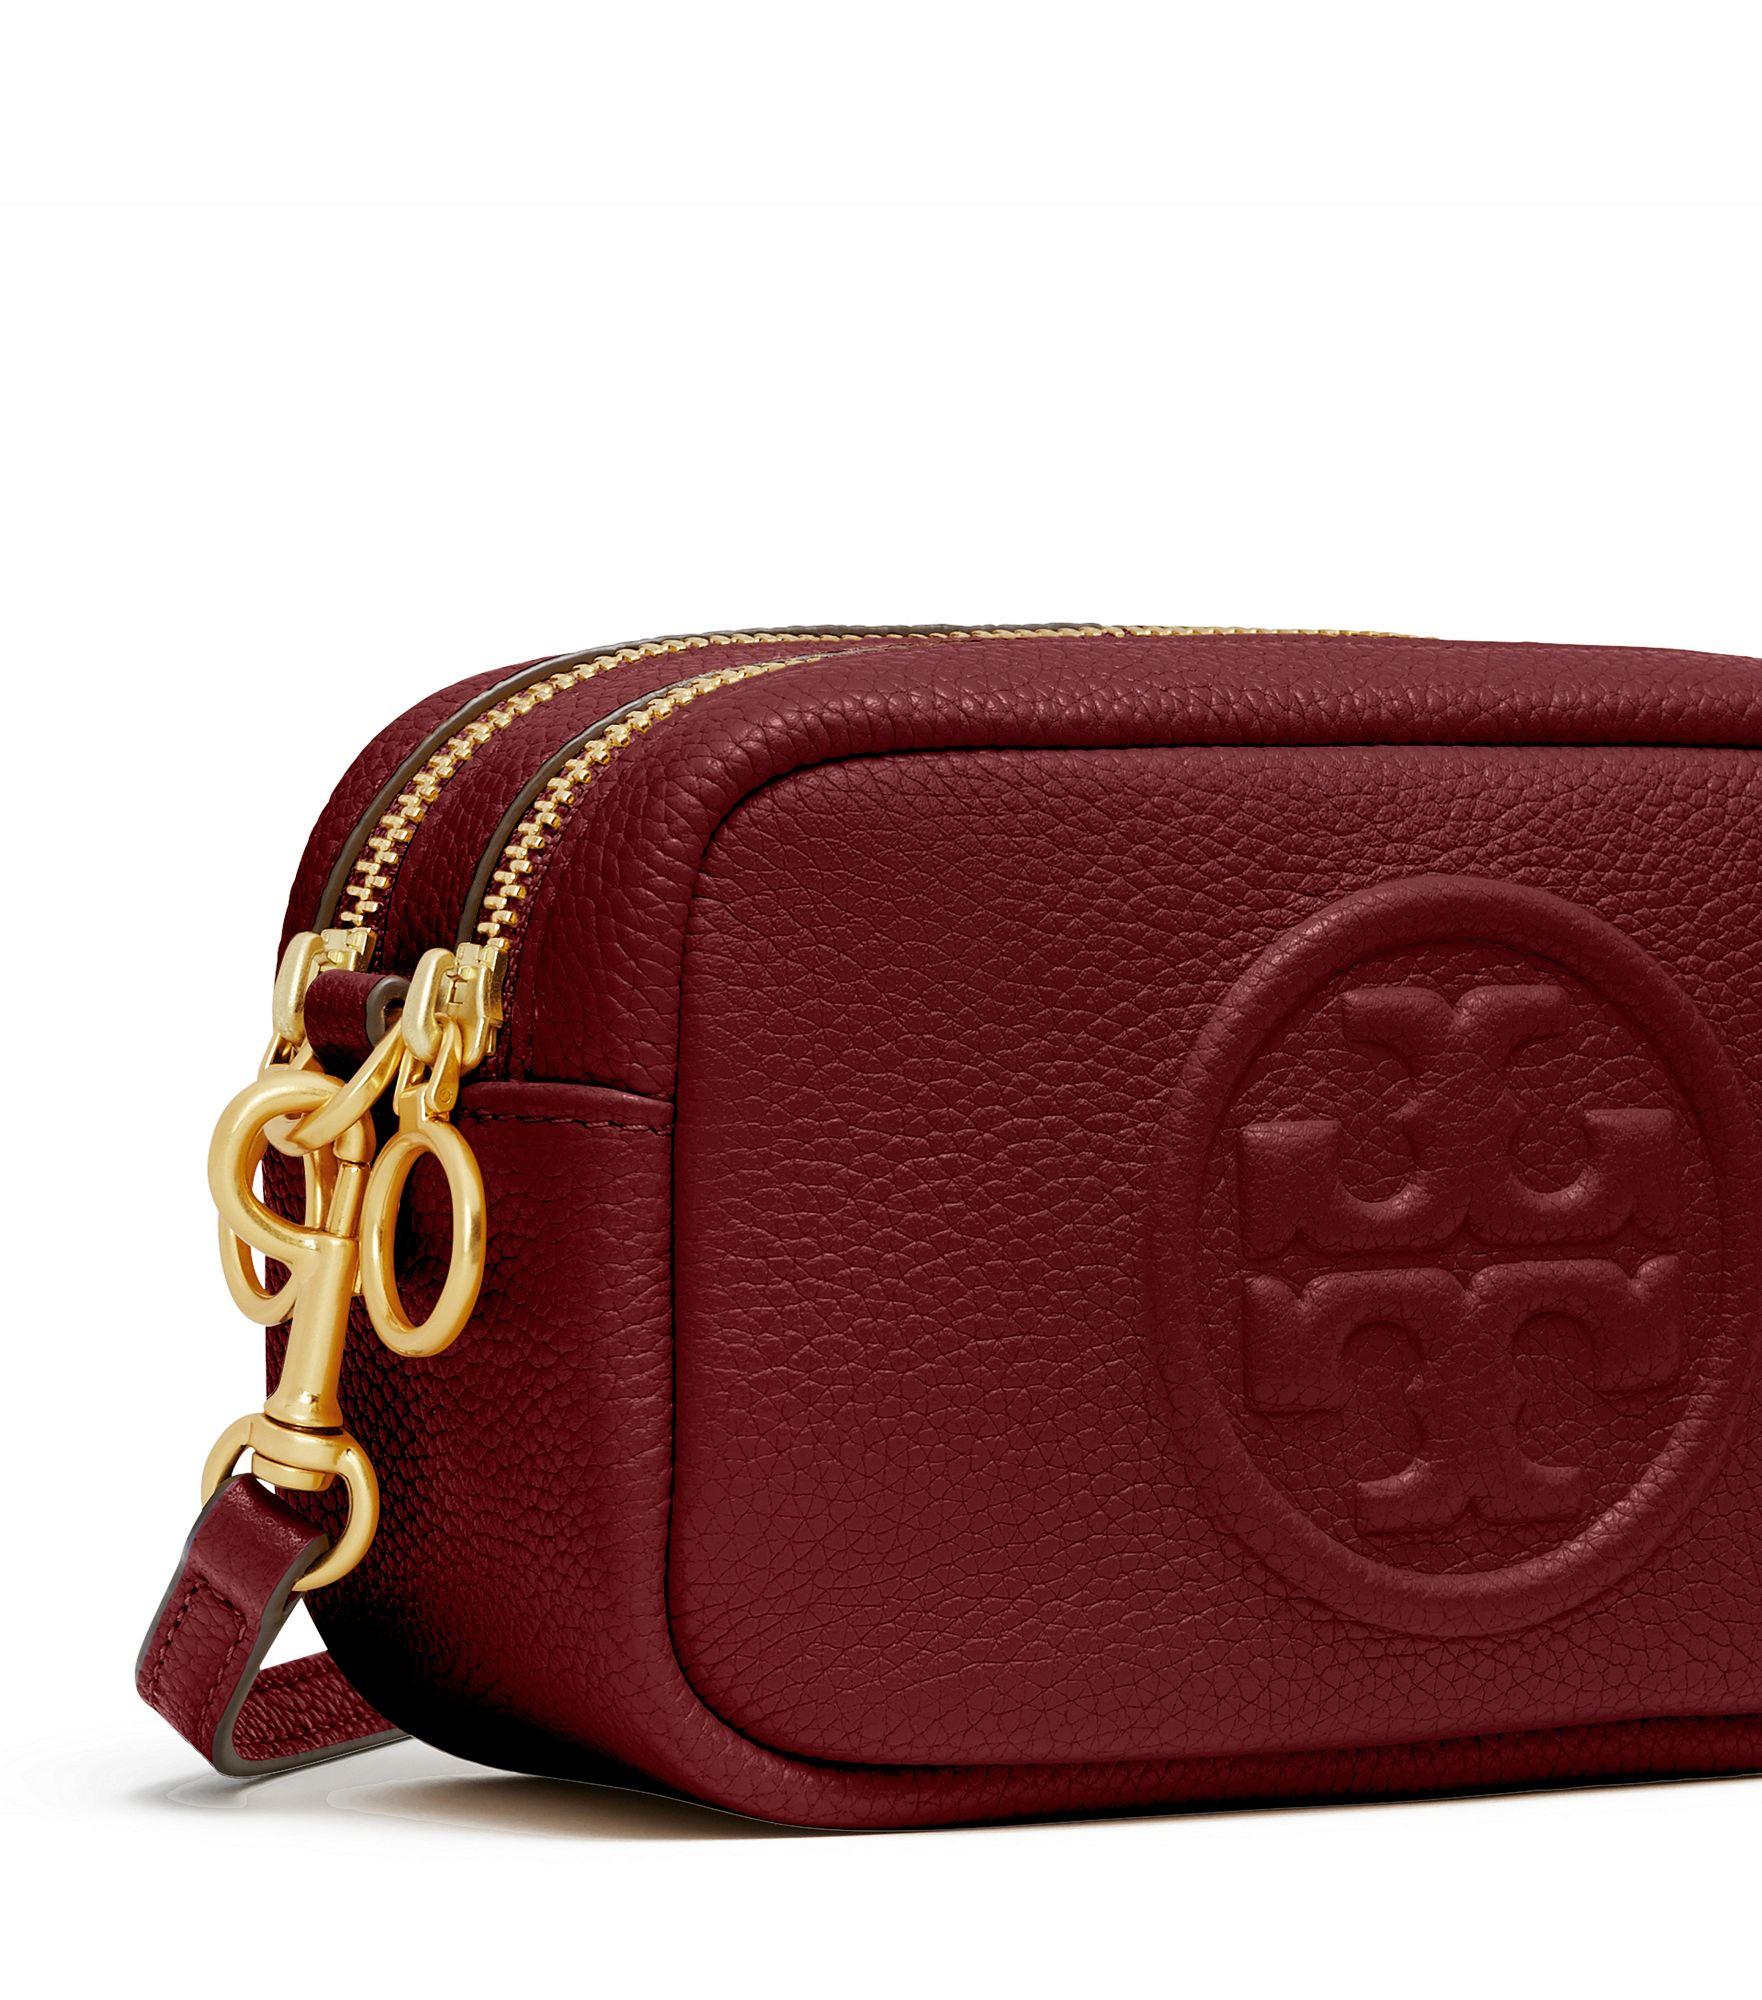 Tory Burch Leather Perry Bombe Mini Bag in Brown - Lyst